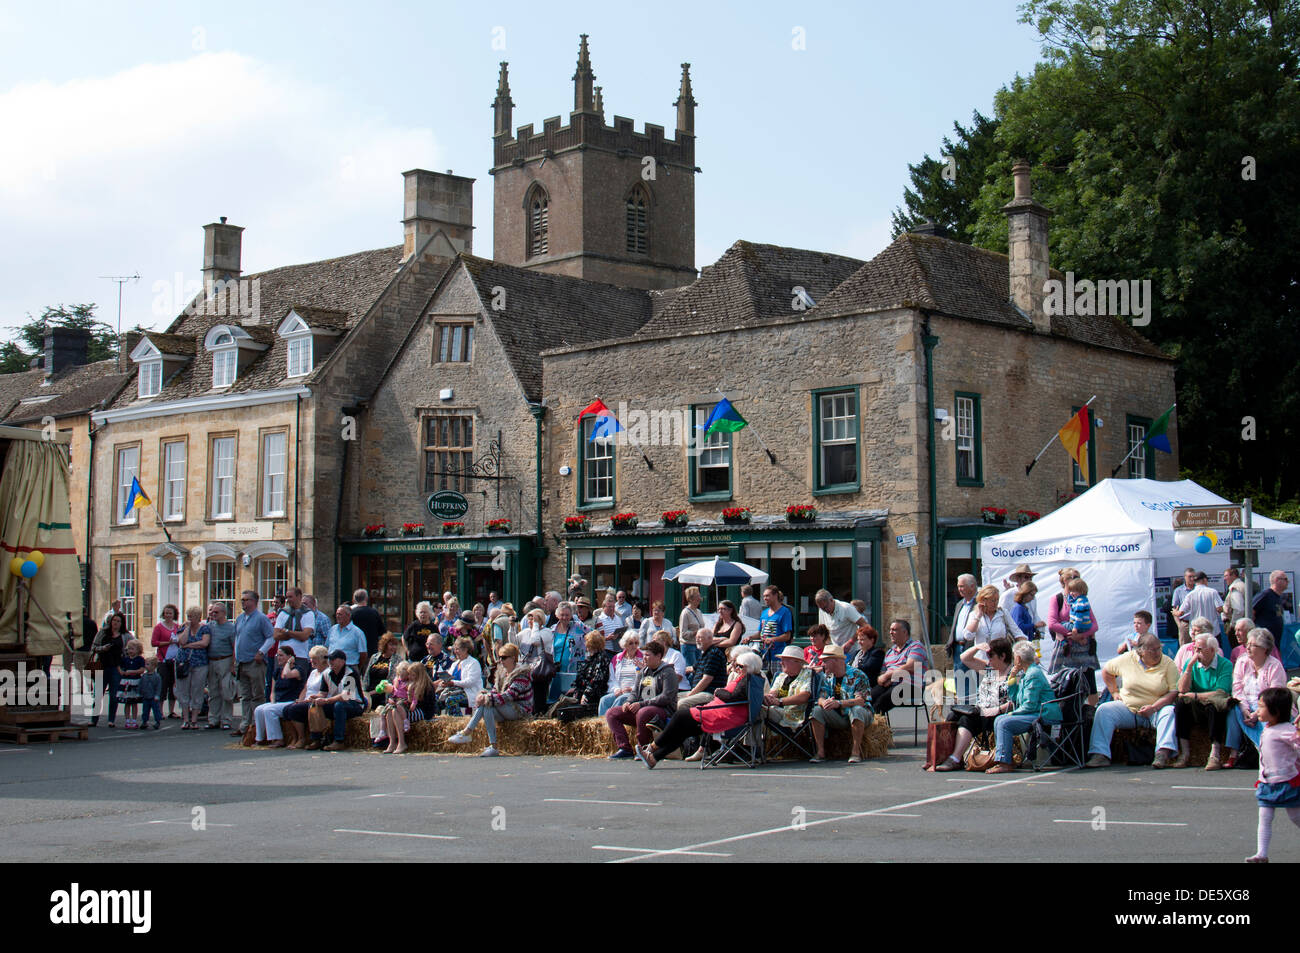 Menschen auf dem Cotswold Festival, Stow-on-the-Wold, Gloucestershire, UK Stockfoto